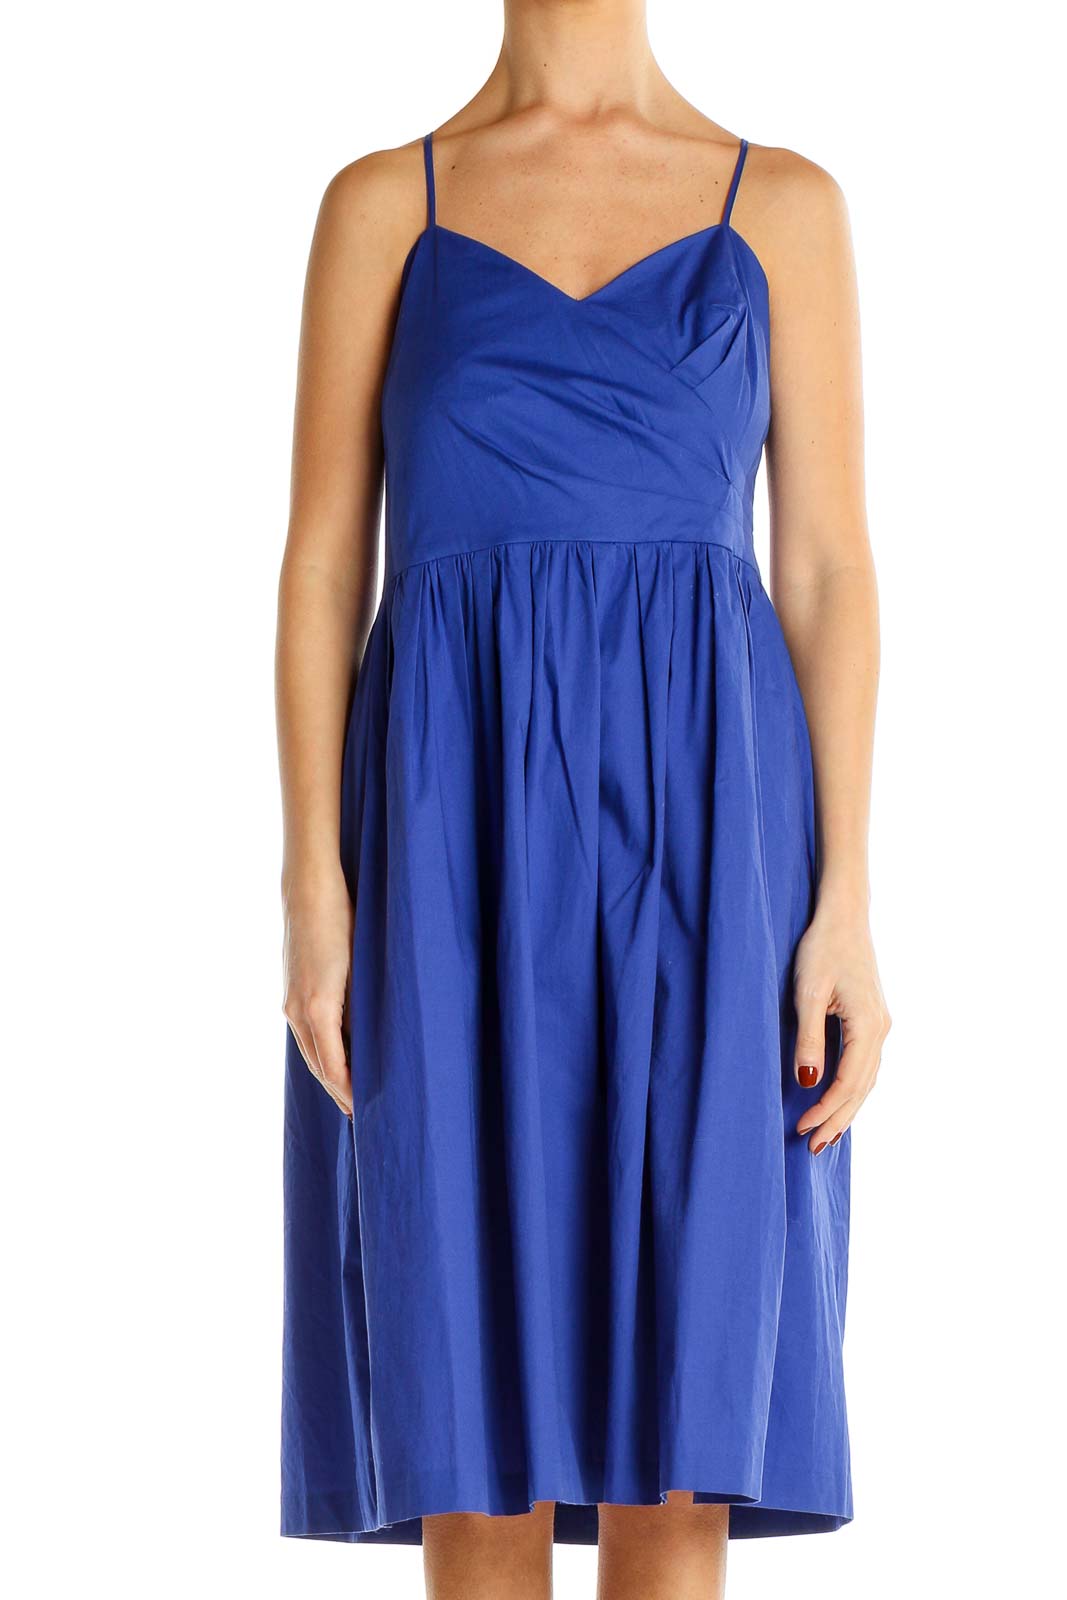 Blue Chic Fit & Flare Dress Front